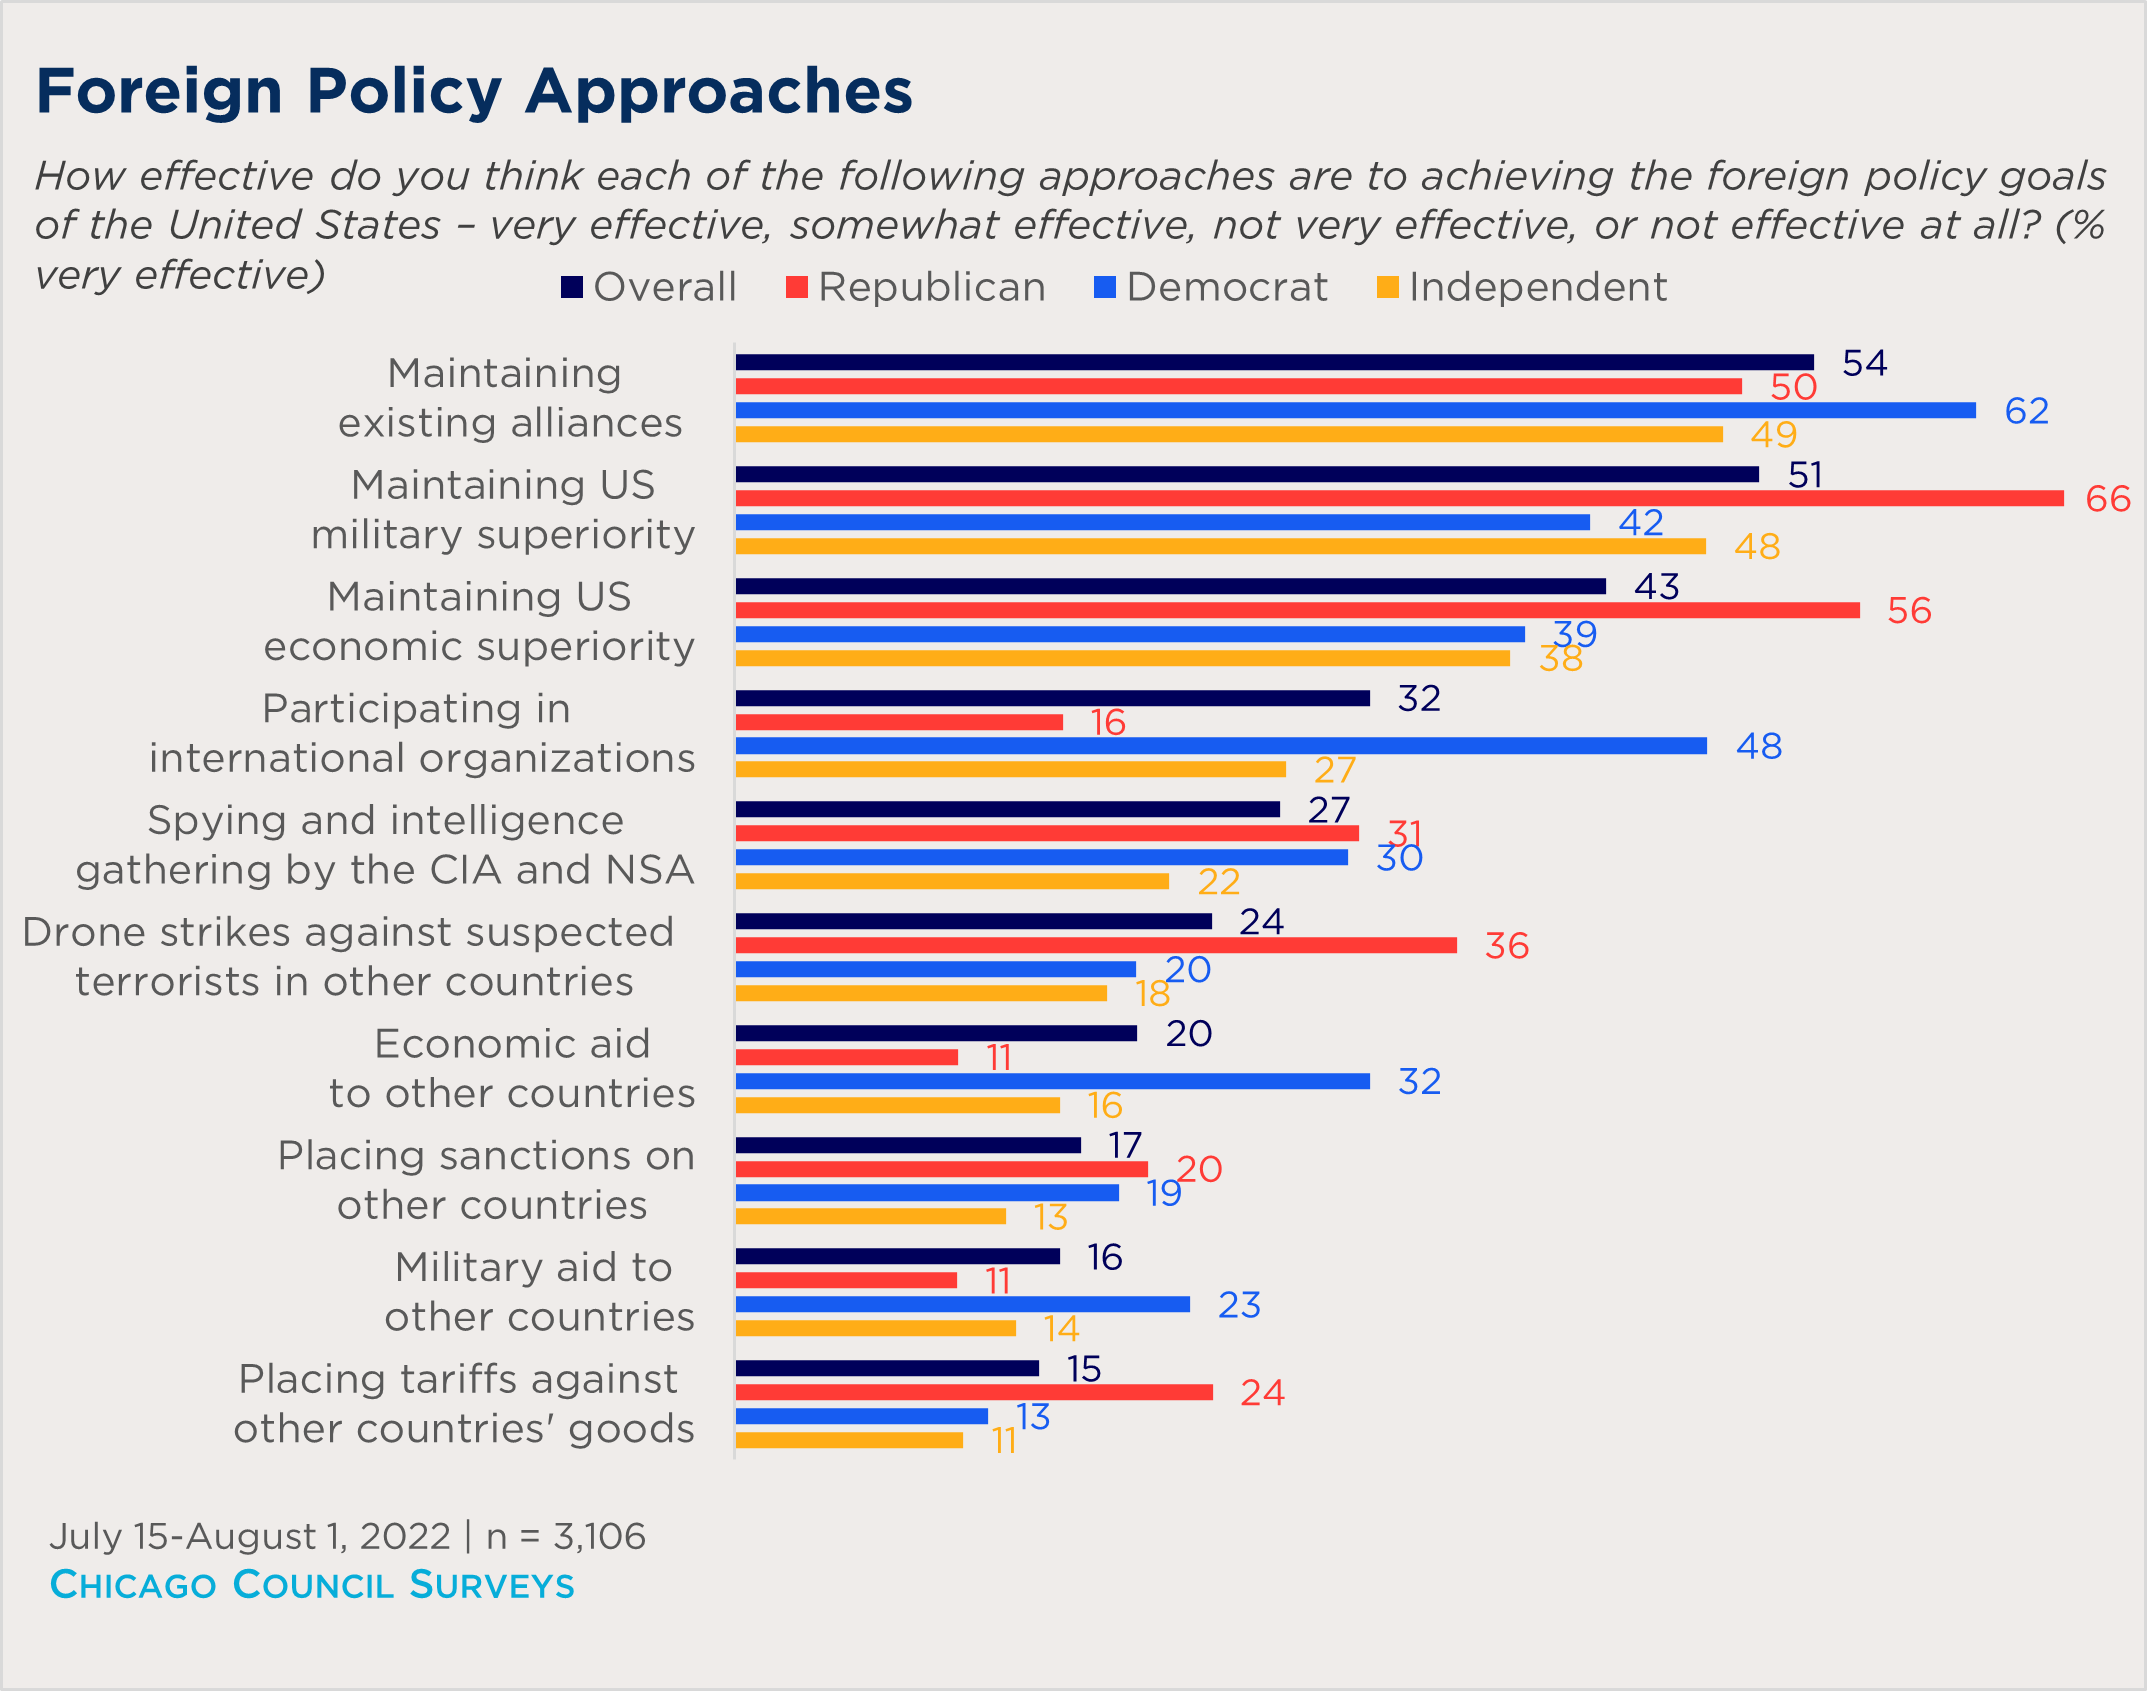 "bar chart showing views on the effectiveness of foreign policy approaches by party"